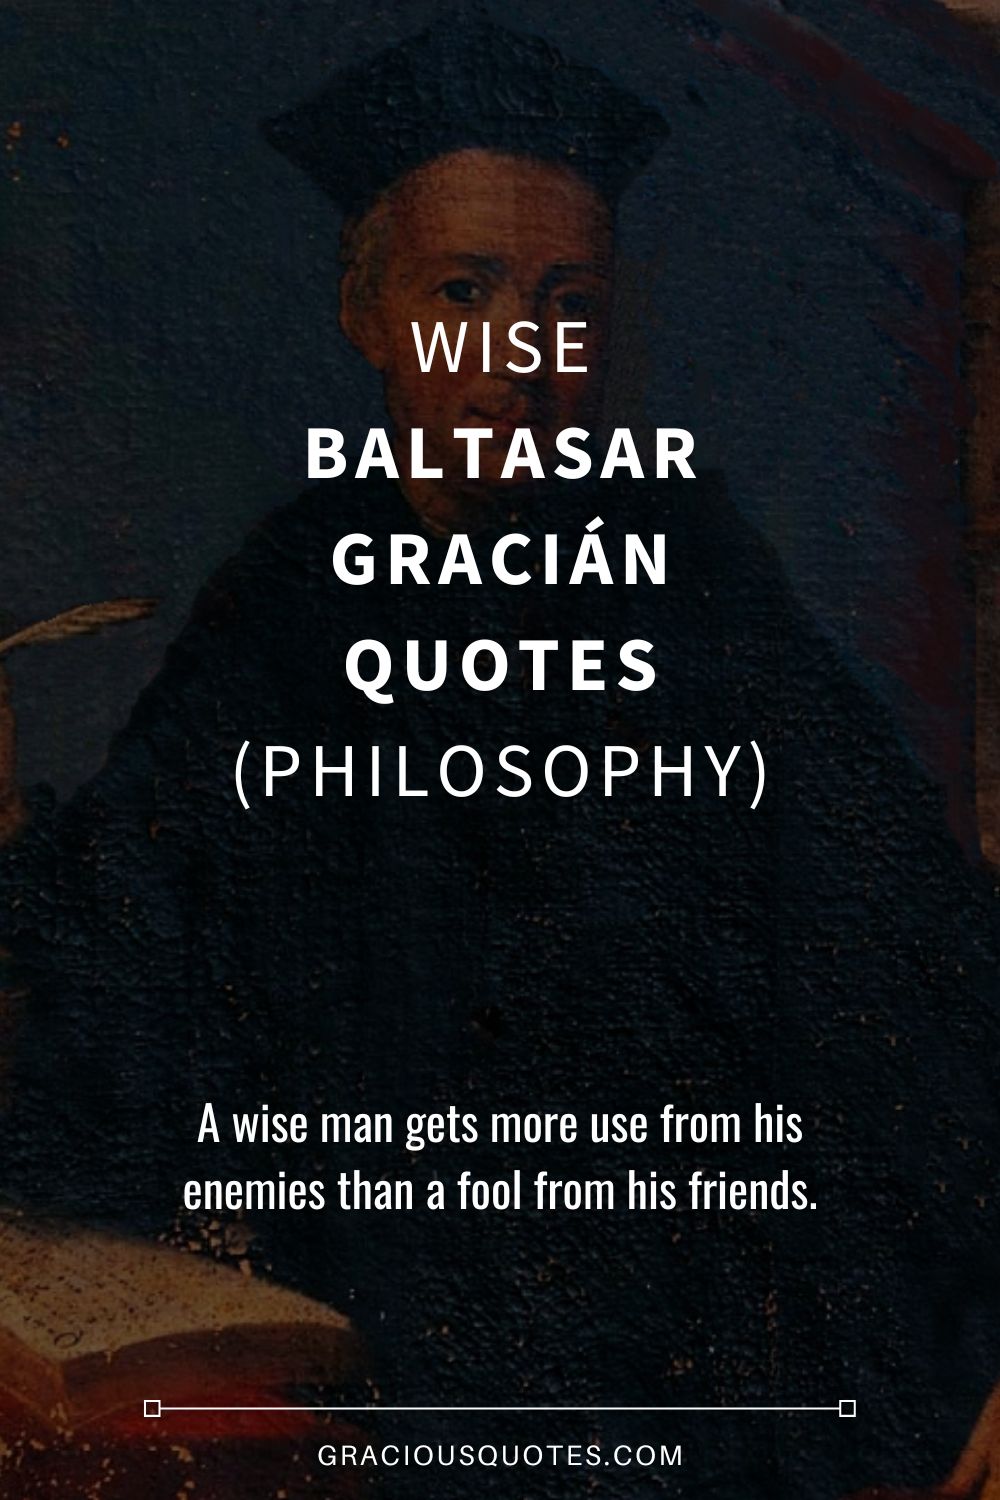 Wise Baltasar Gracián Quotes (PHILOSOPHY) - Gracious Quotes